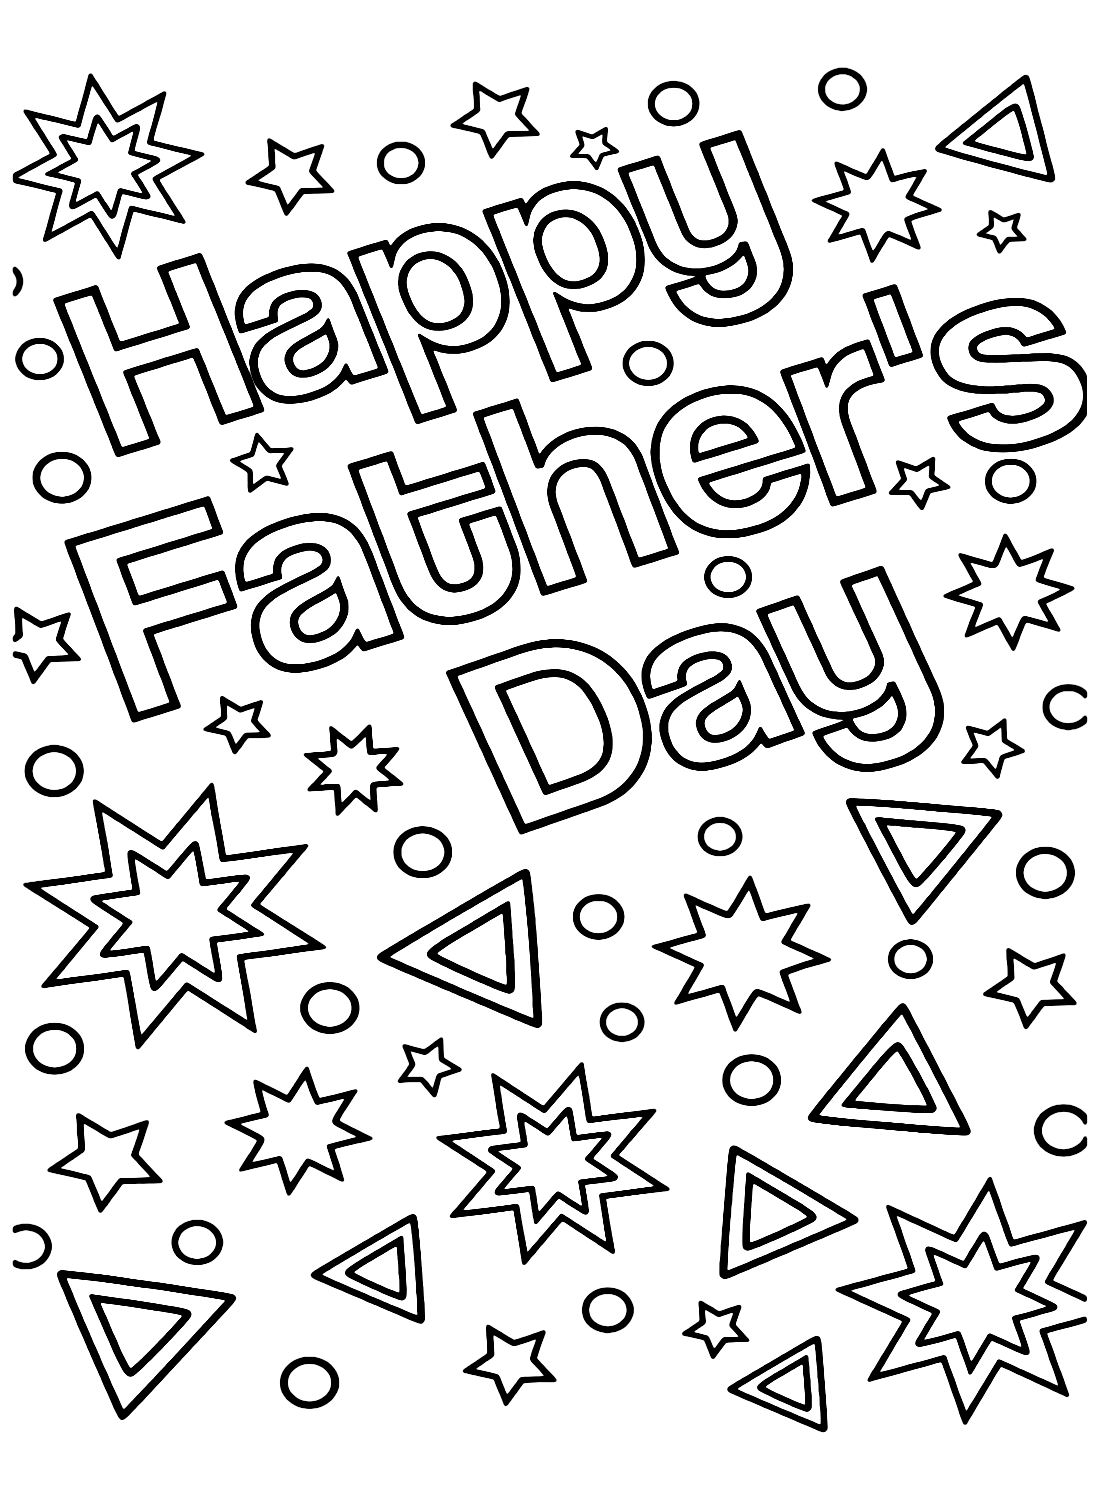 happy-father-s-day-doodle-coloring-page-free-printable-coloring-pages